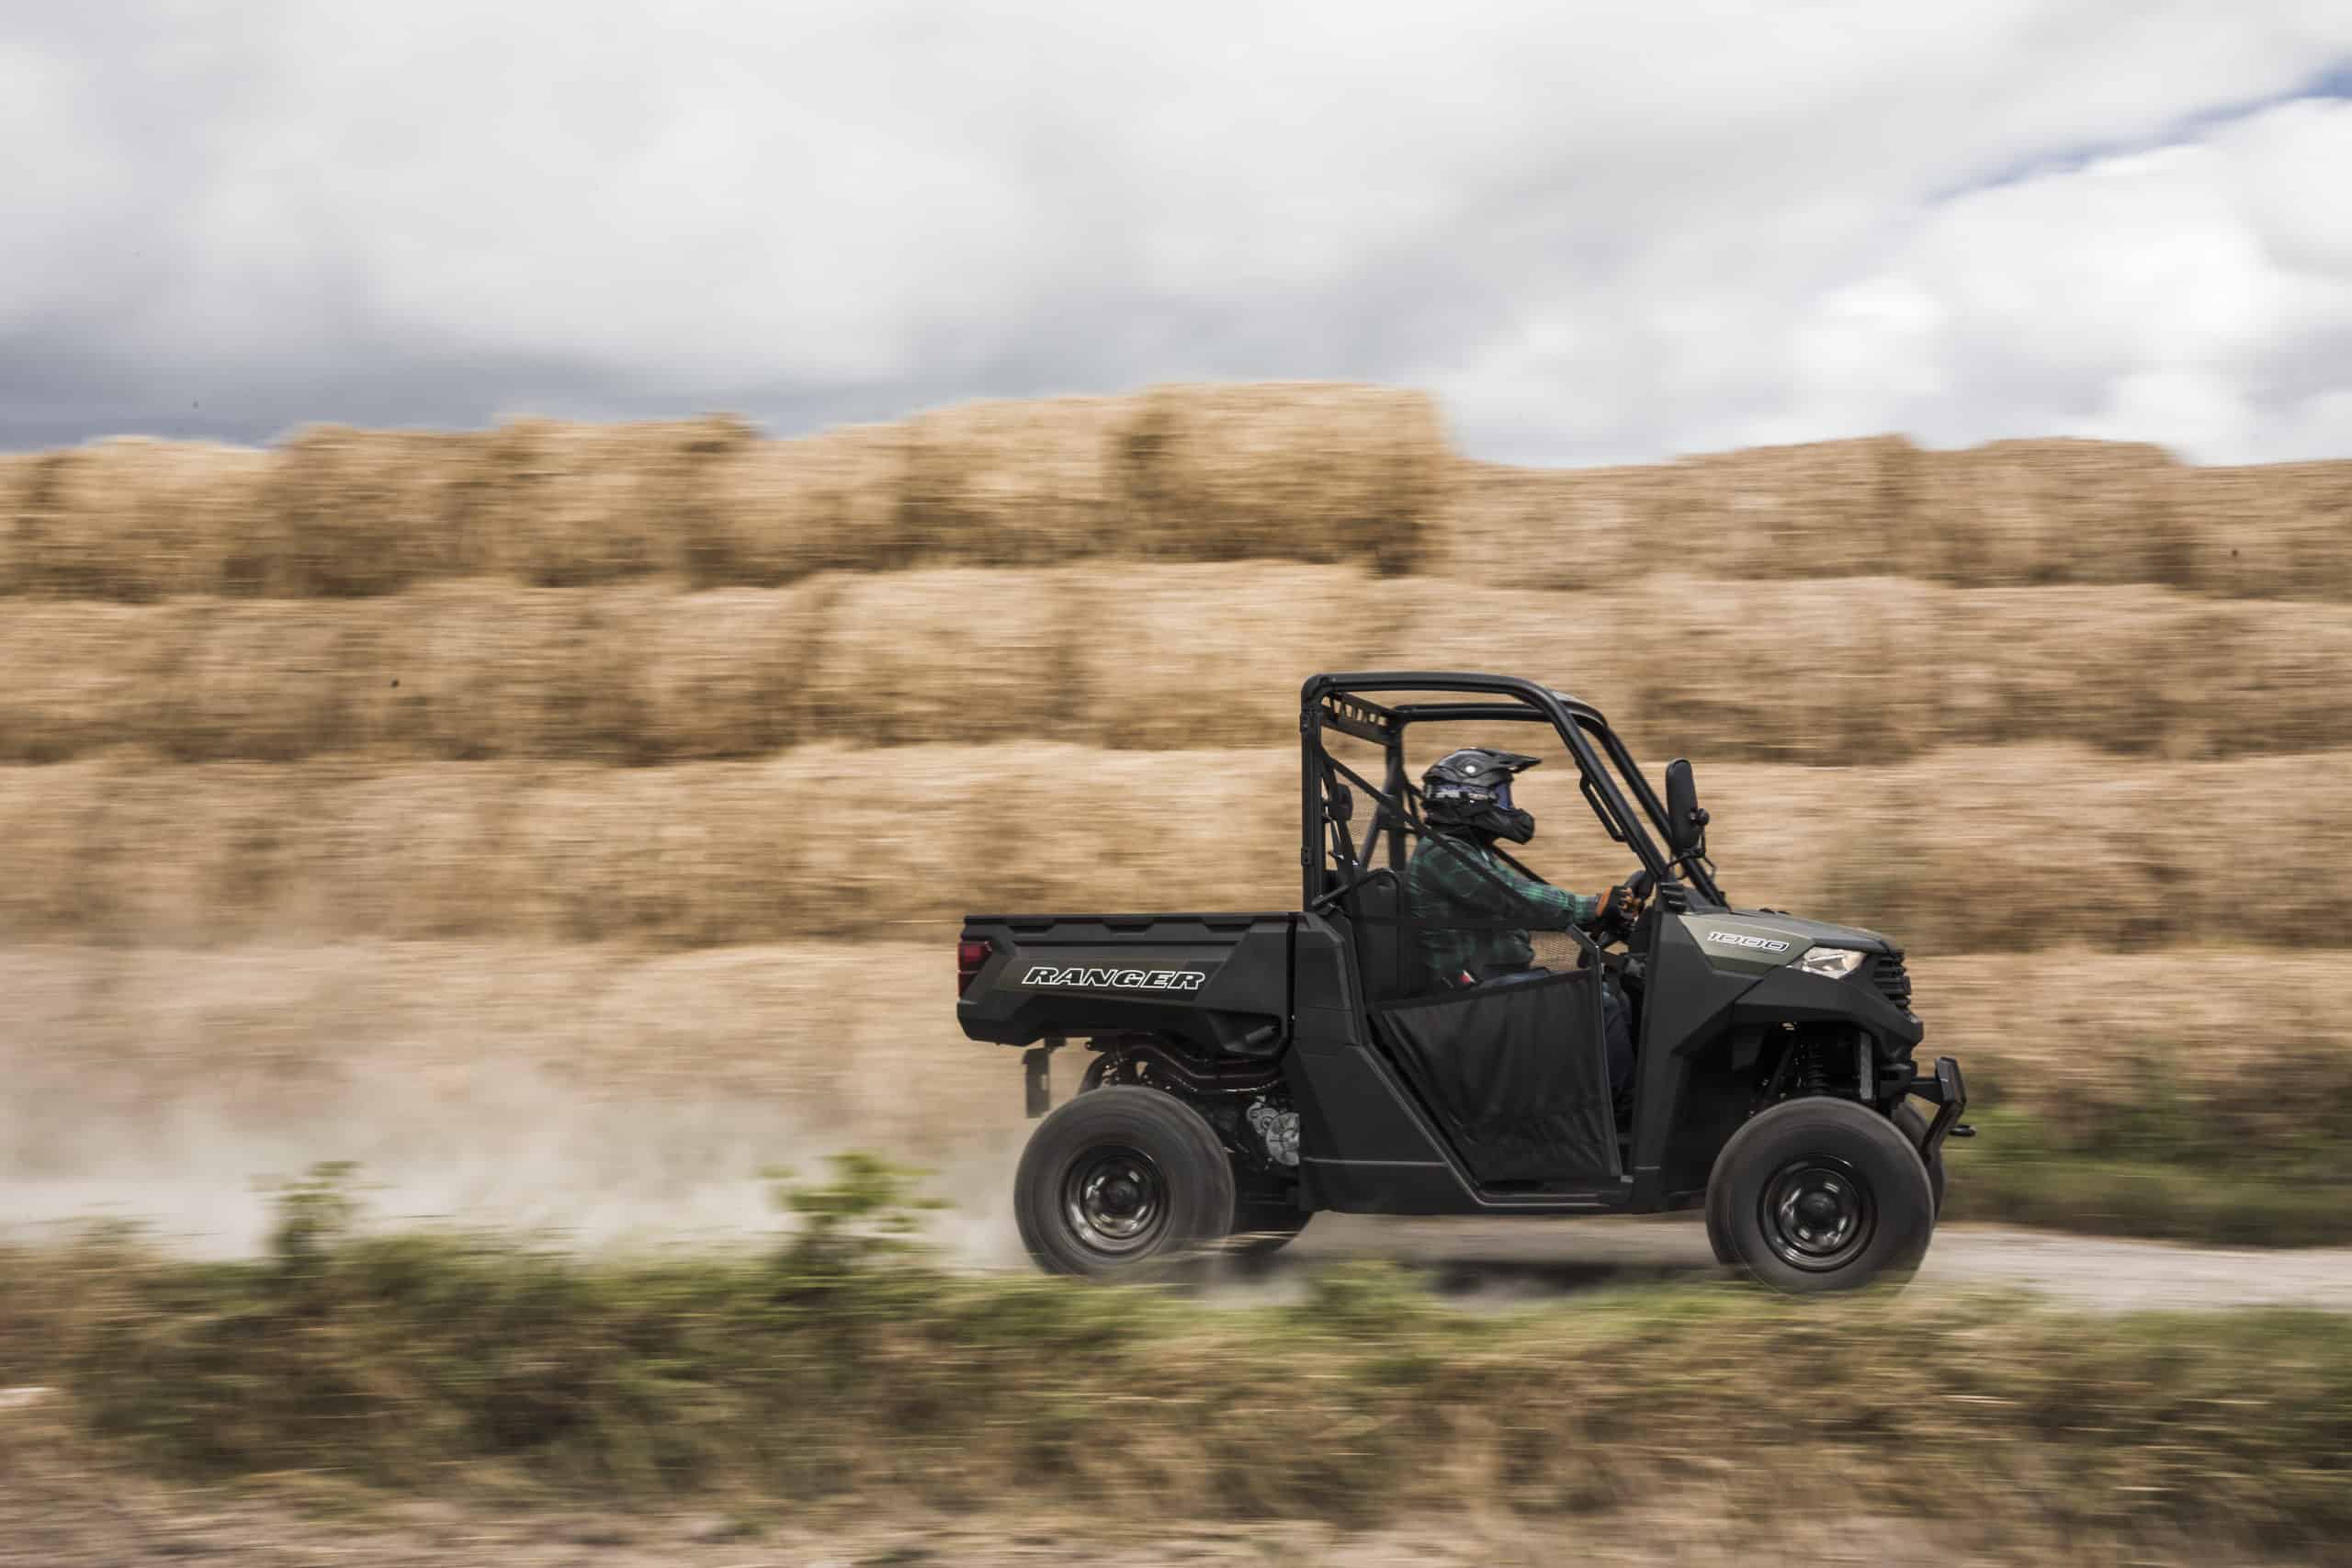 Polaris introduces its new full-size Ranger line-up for 2021